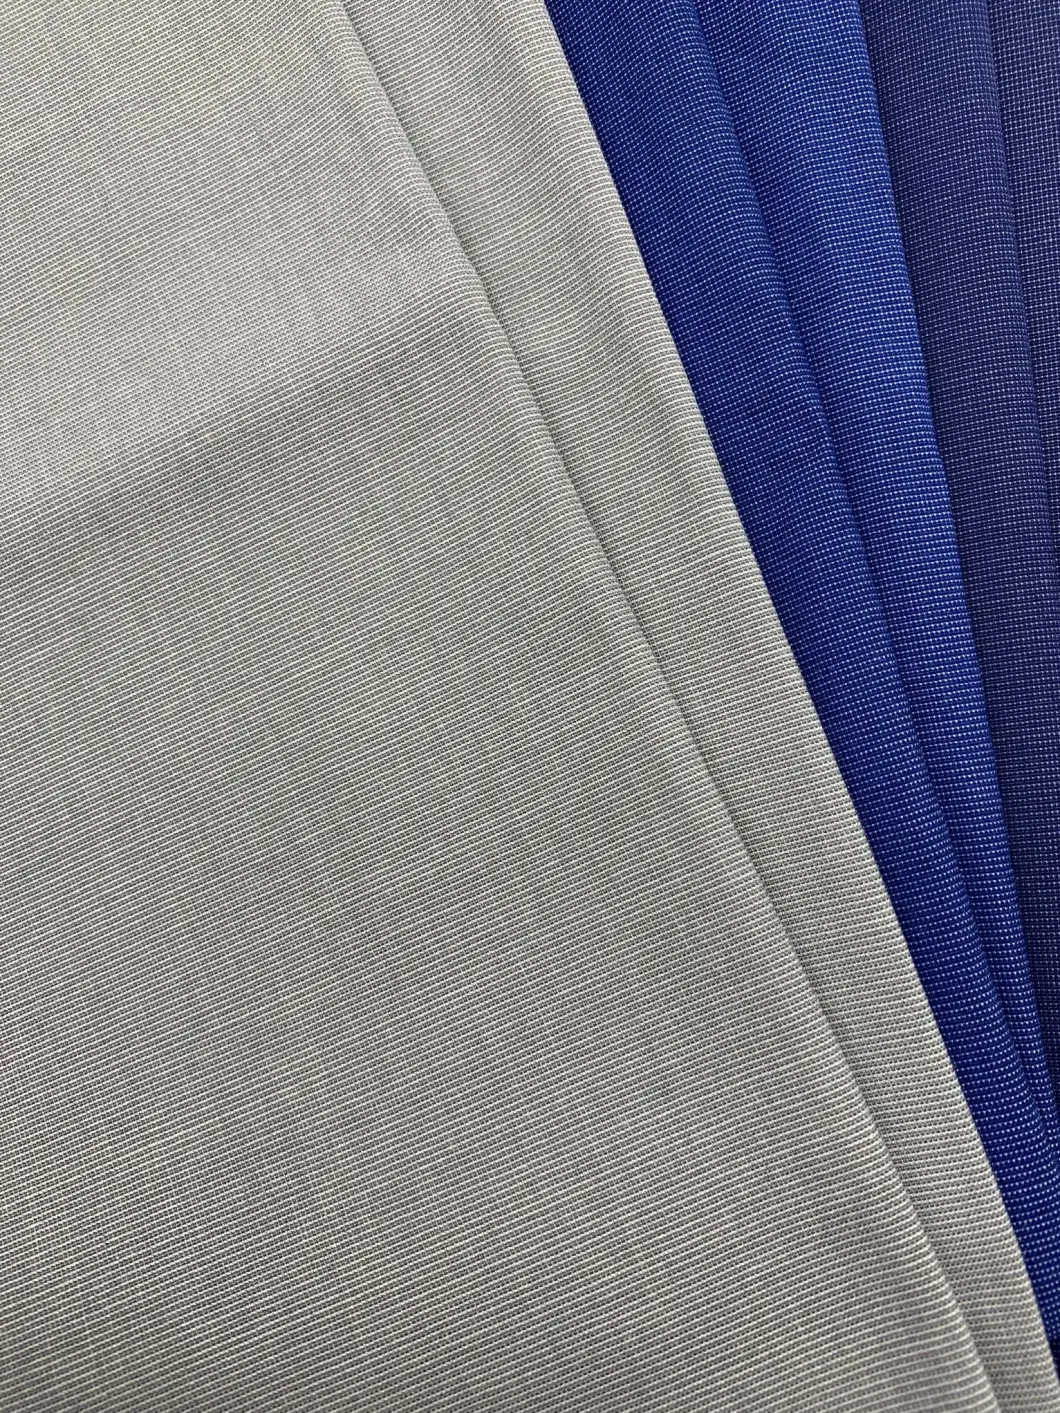 Wholesale 100% Polyester 150d Full Twist Imitate Memory Suit Fabric for Jacket Suit Fabric